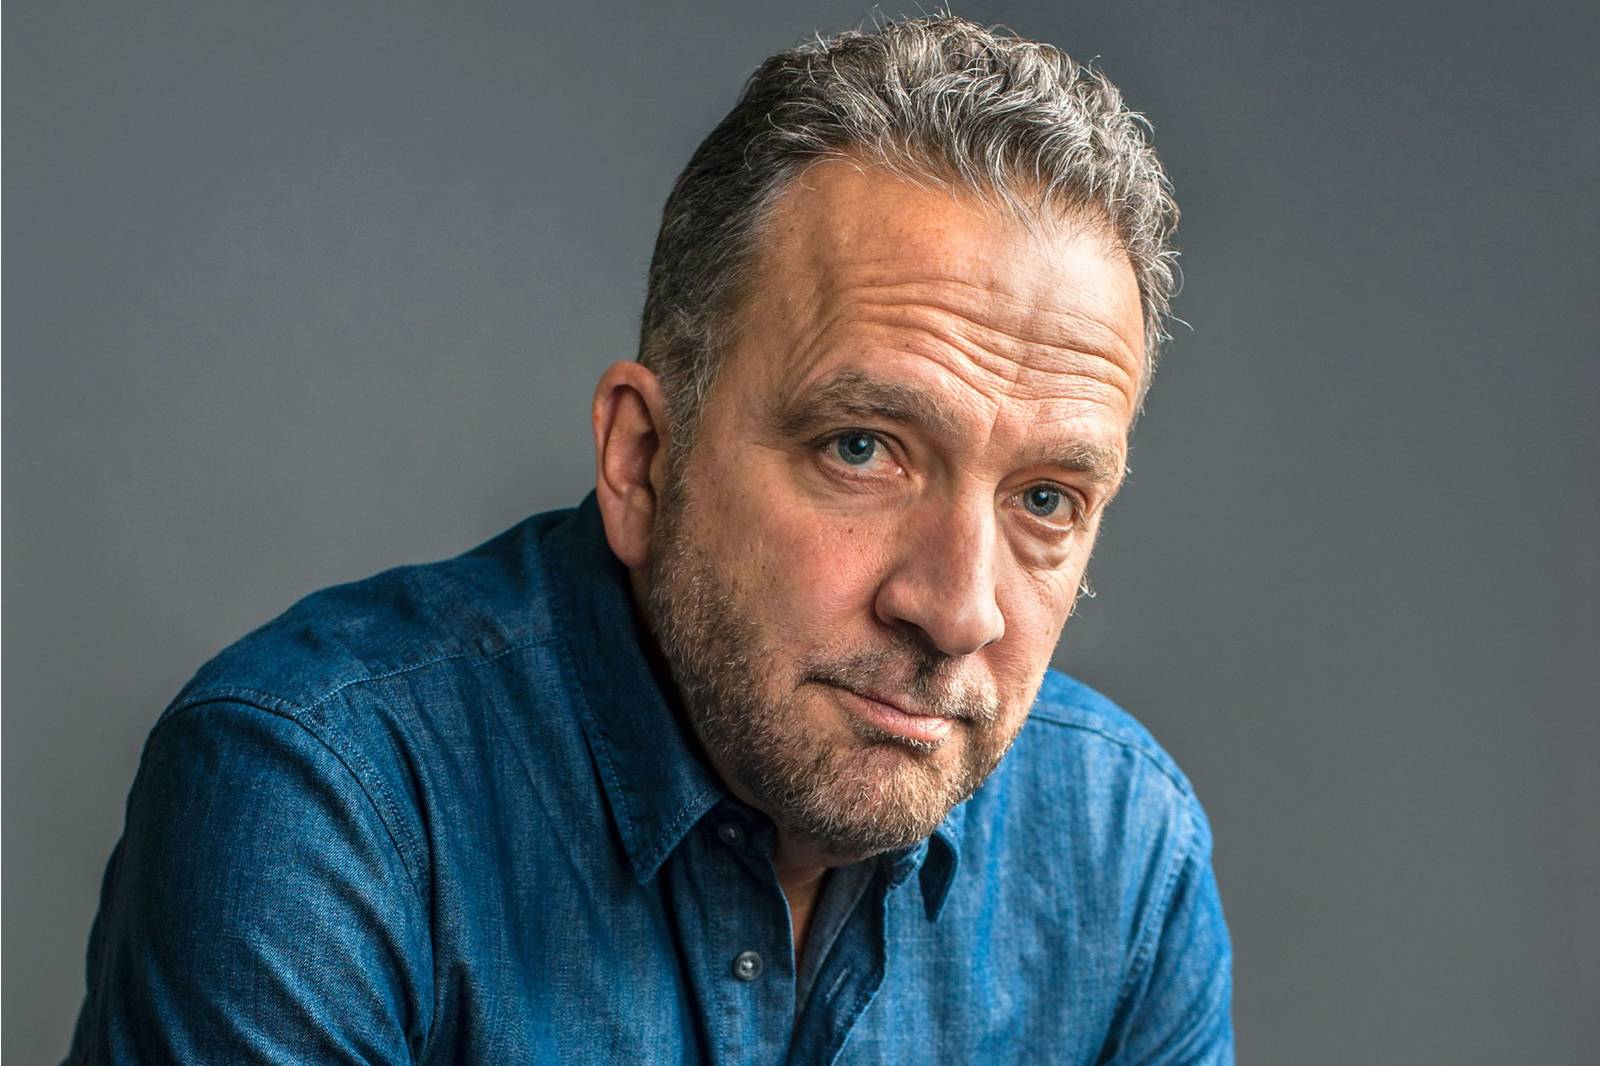 Our Podcast Episode #9 guest, novelist and HBO Producer George Pelecanos